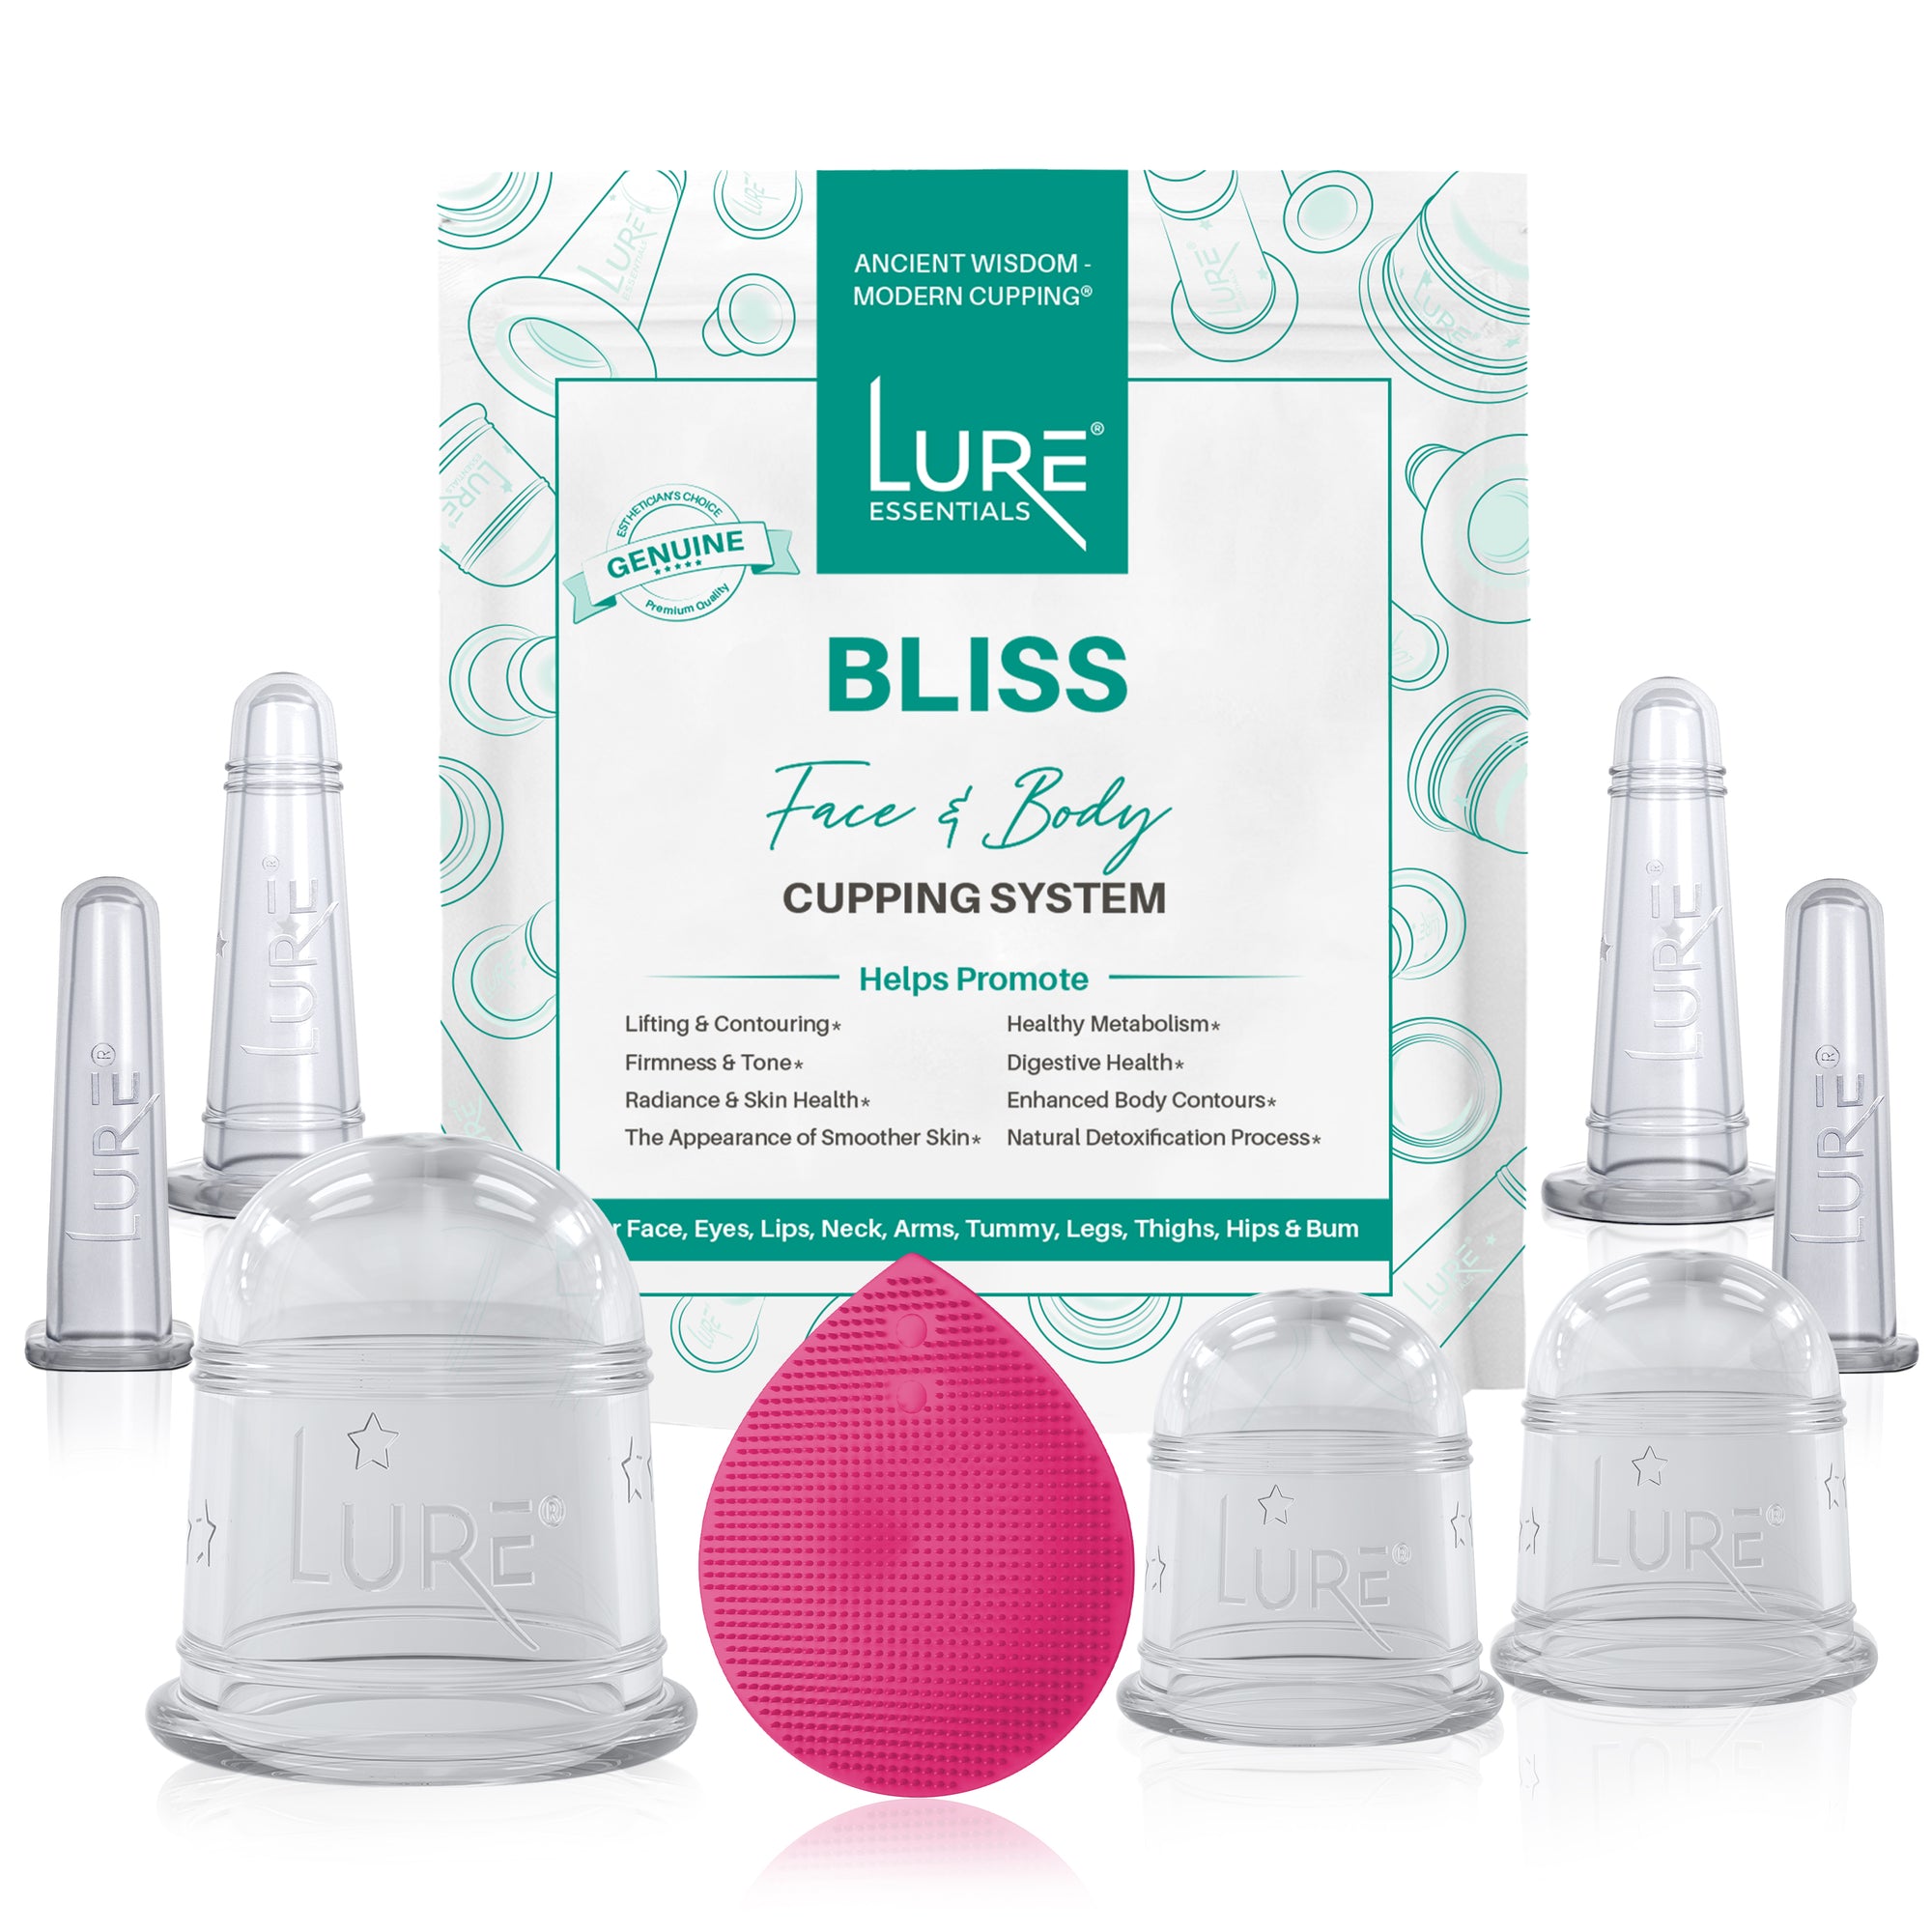 BLISS Face and Body 8 Piece Cupping Set